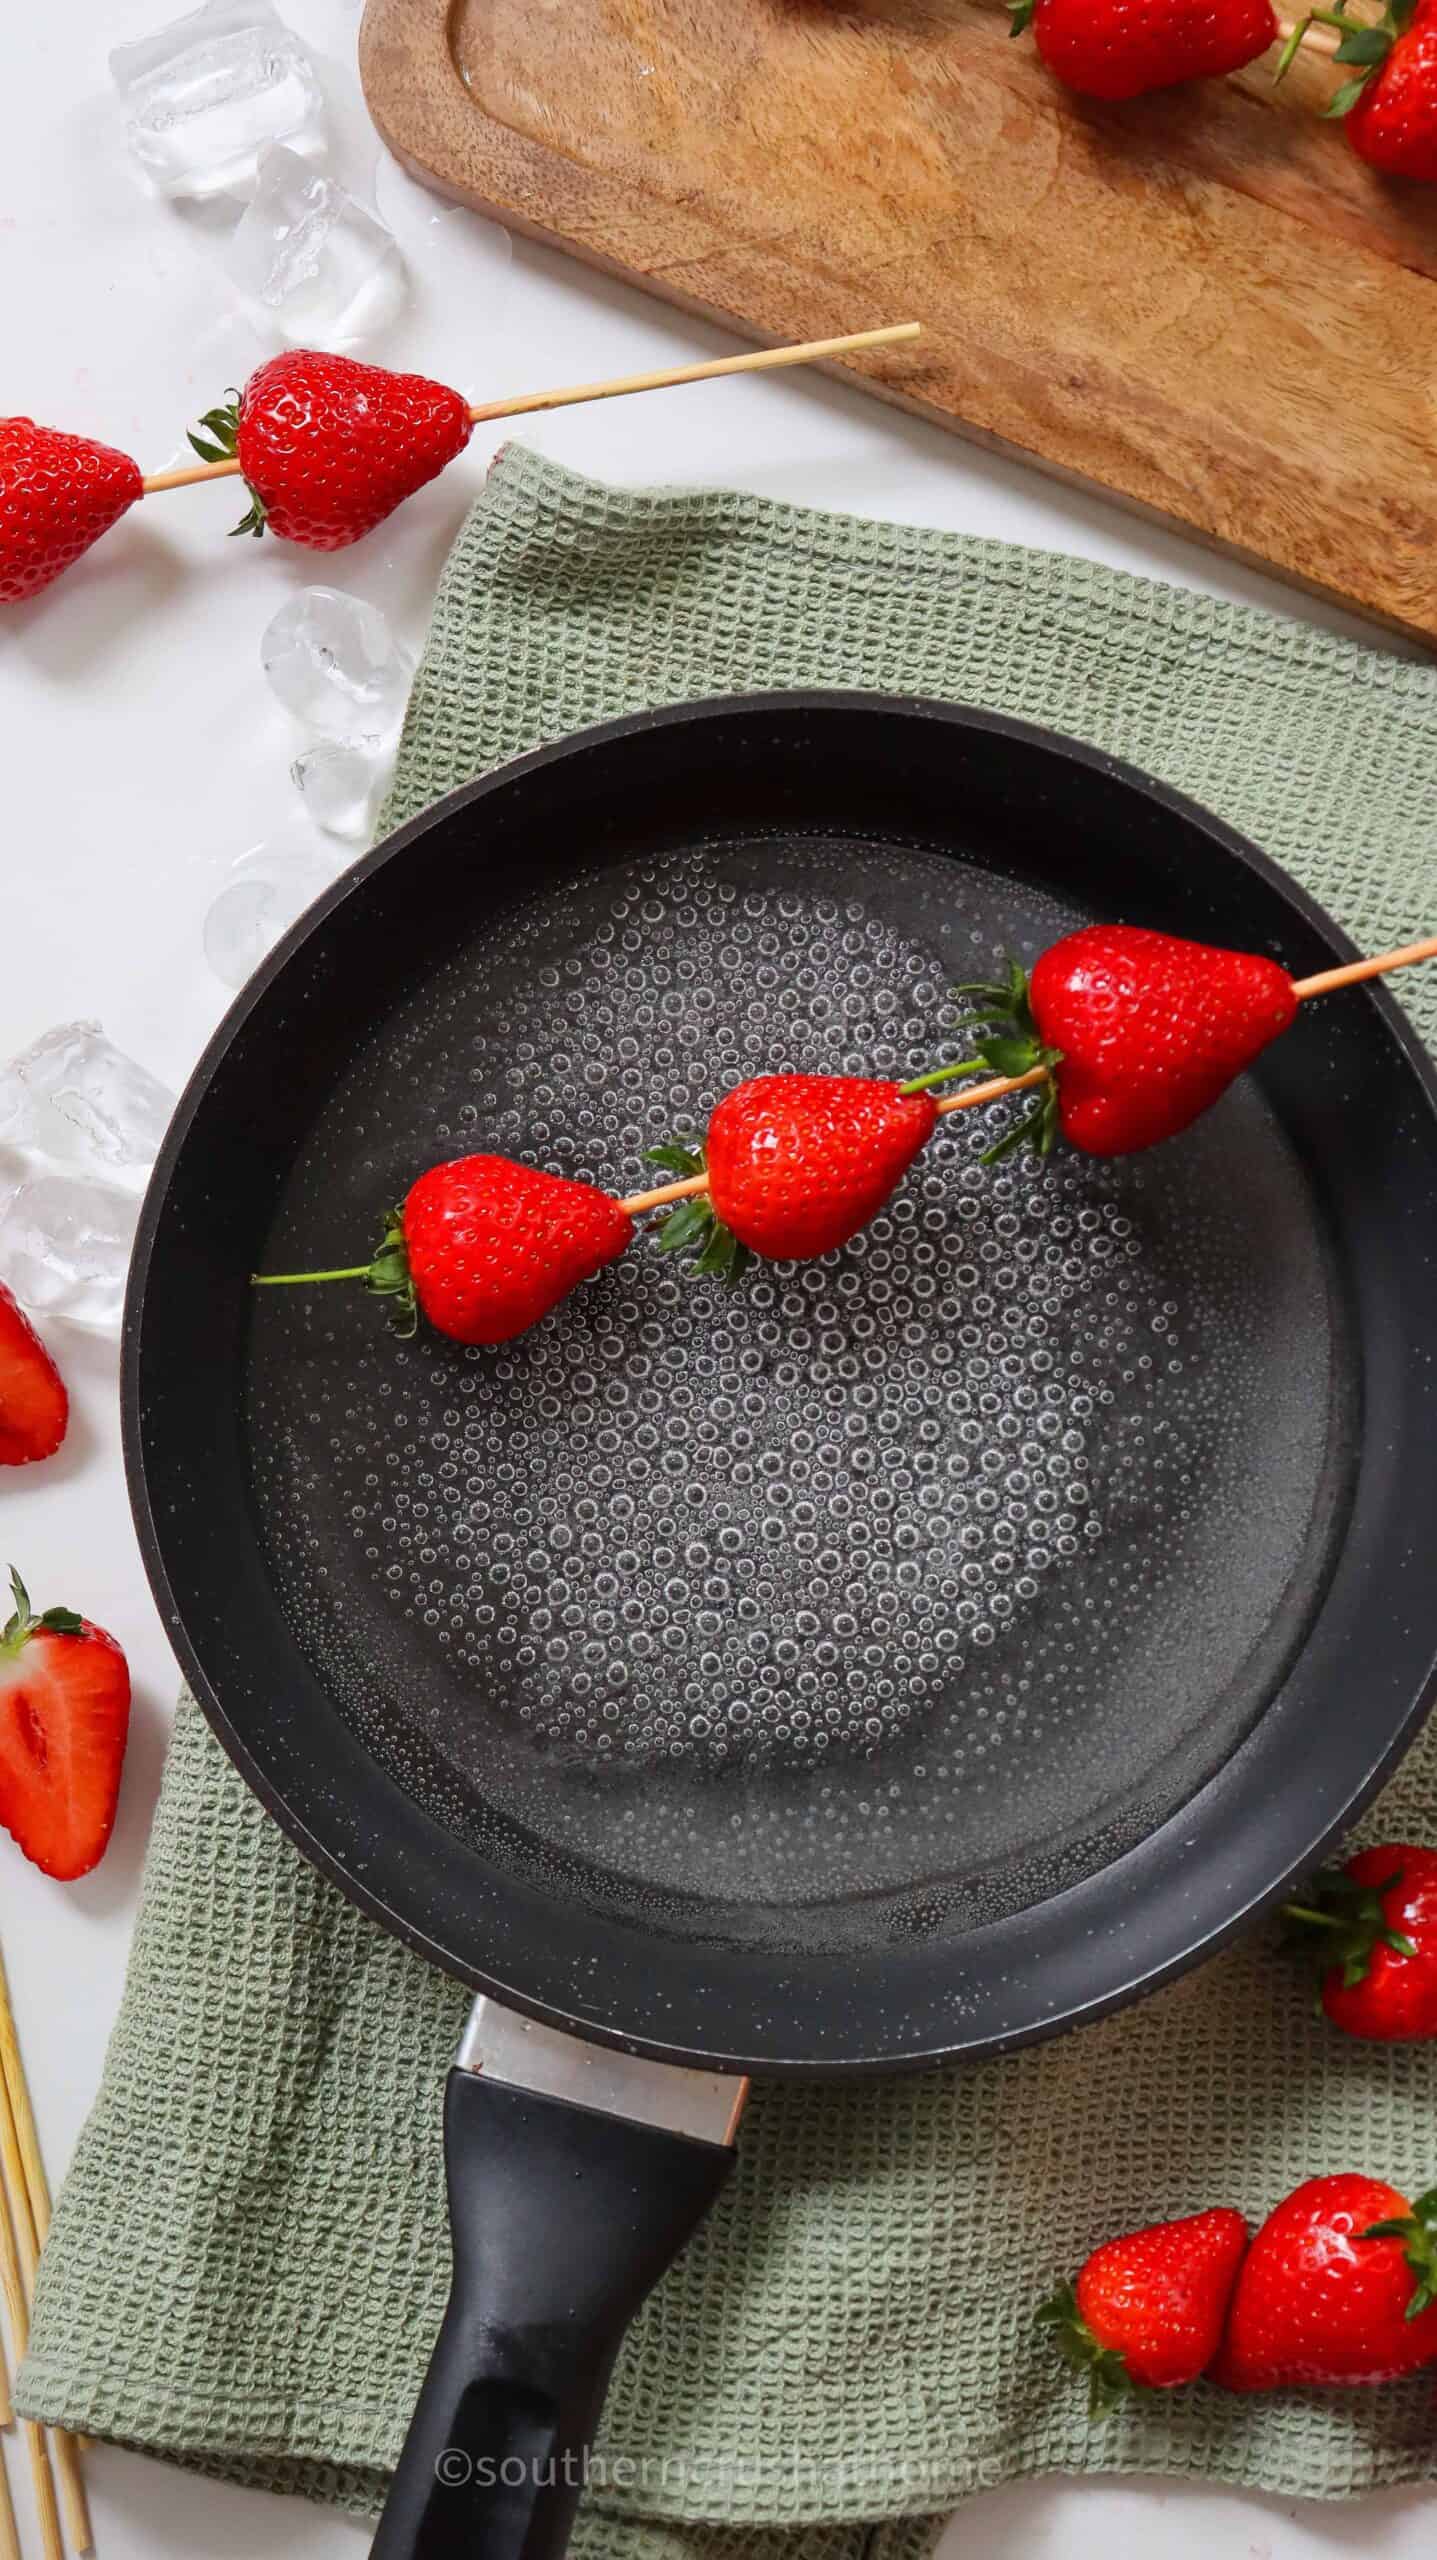 dipping strawberries into hot sugar water